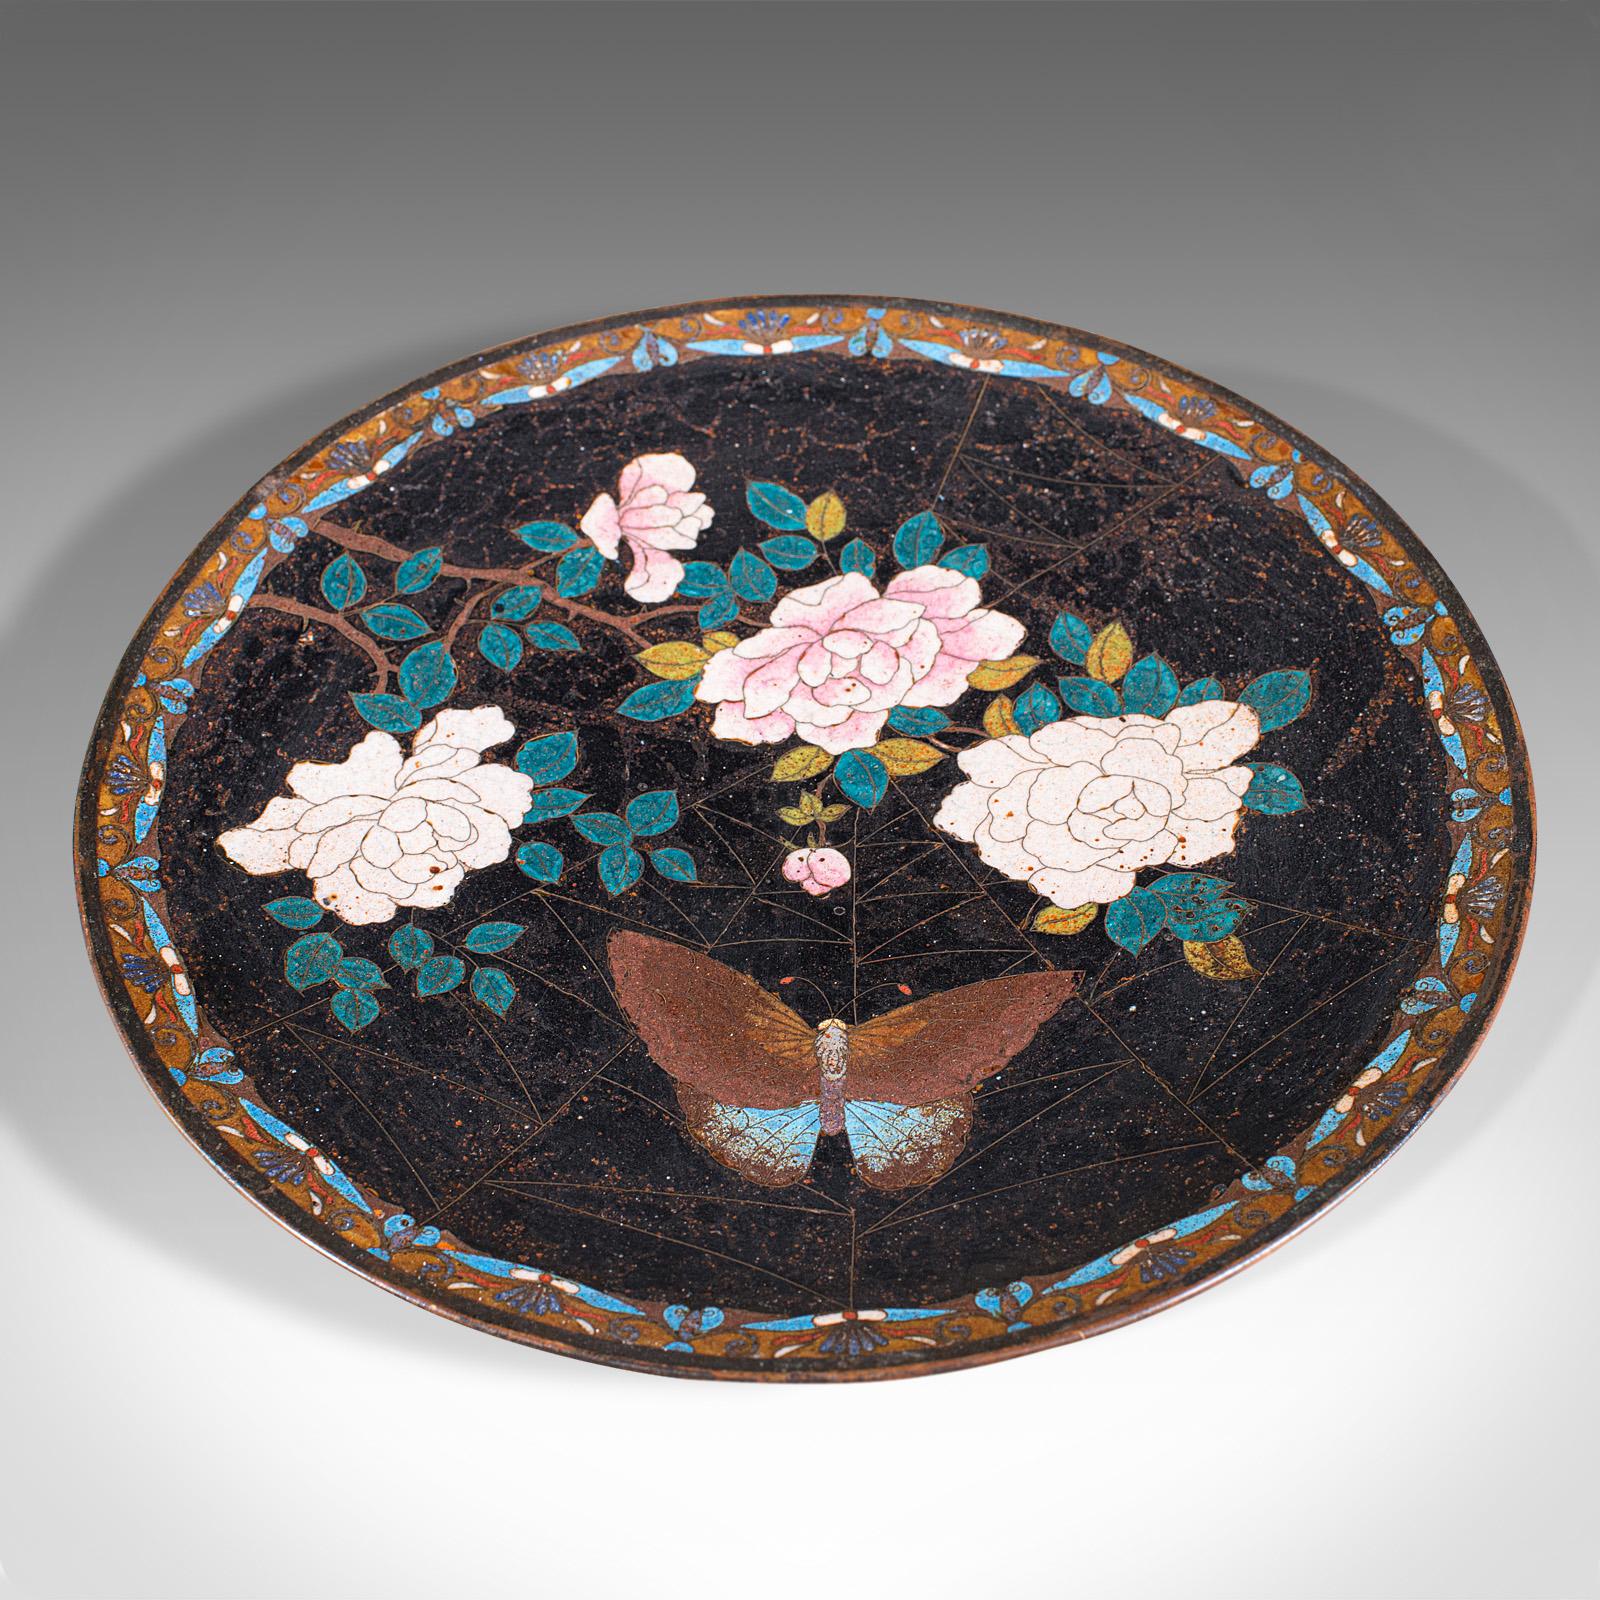 This is an antique decorative plate. A Japanese, cloisonne fruit serving dish, dating to the early Victorian period, circa 1850.

Delightful example of Victorian cloisonne
Displays a desirable aged patina with minor wear commensurate with